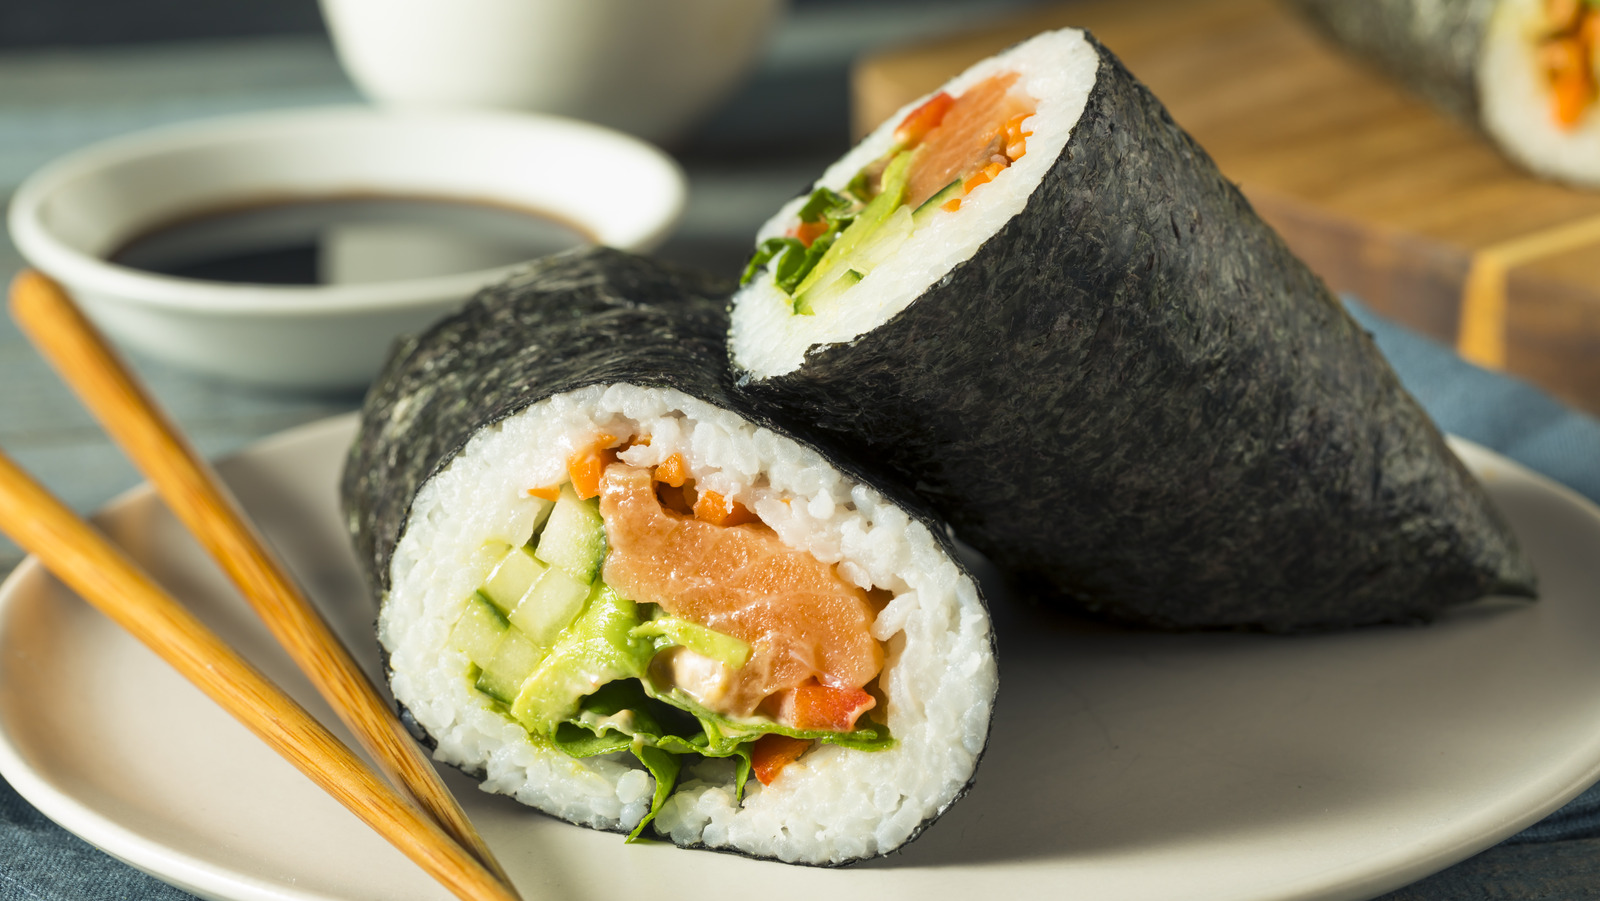 https://www.mashed.com/img/gallery/the-wax-paper-hack-that-makes-rolling-sushi-burritos-easy/l-intro-1702653974.jpg